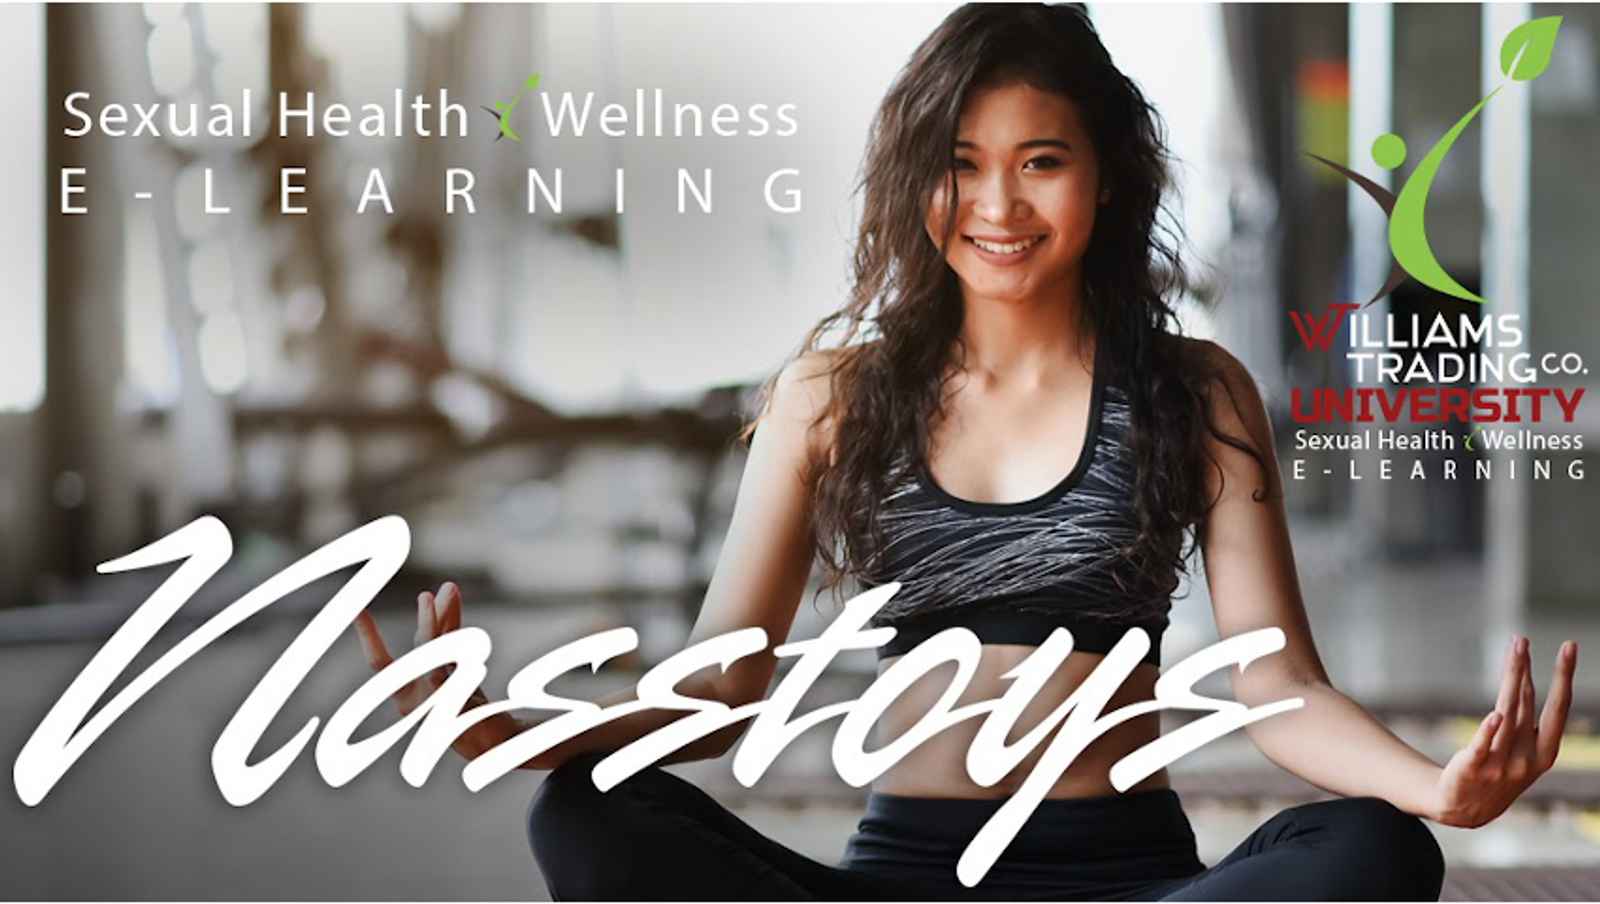 Williams Trading University Launches New Health & Wellness Course